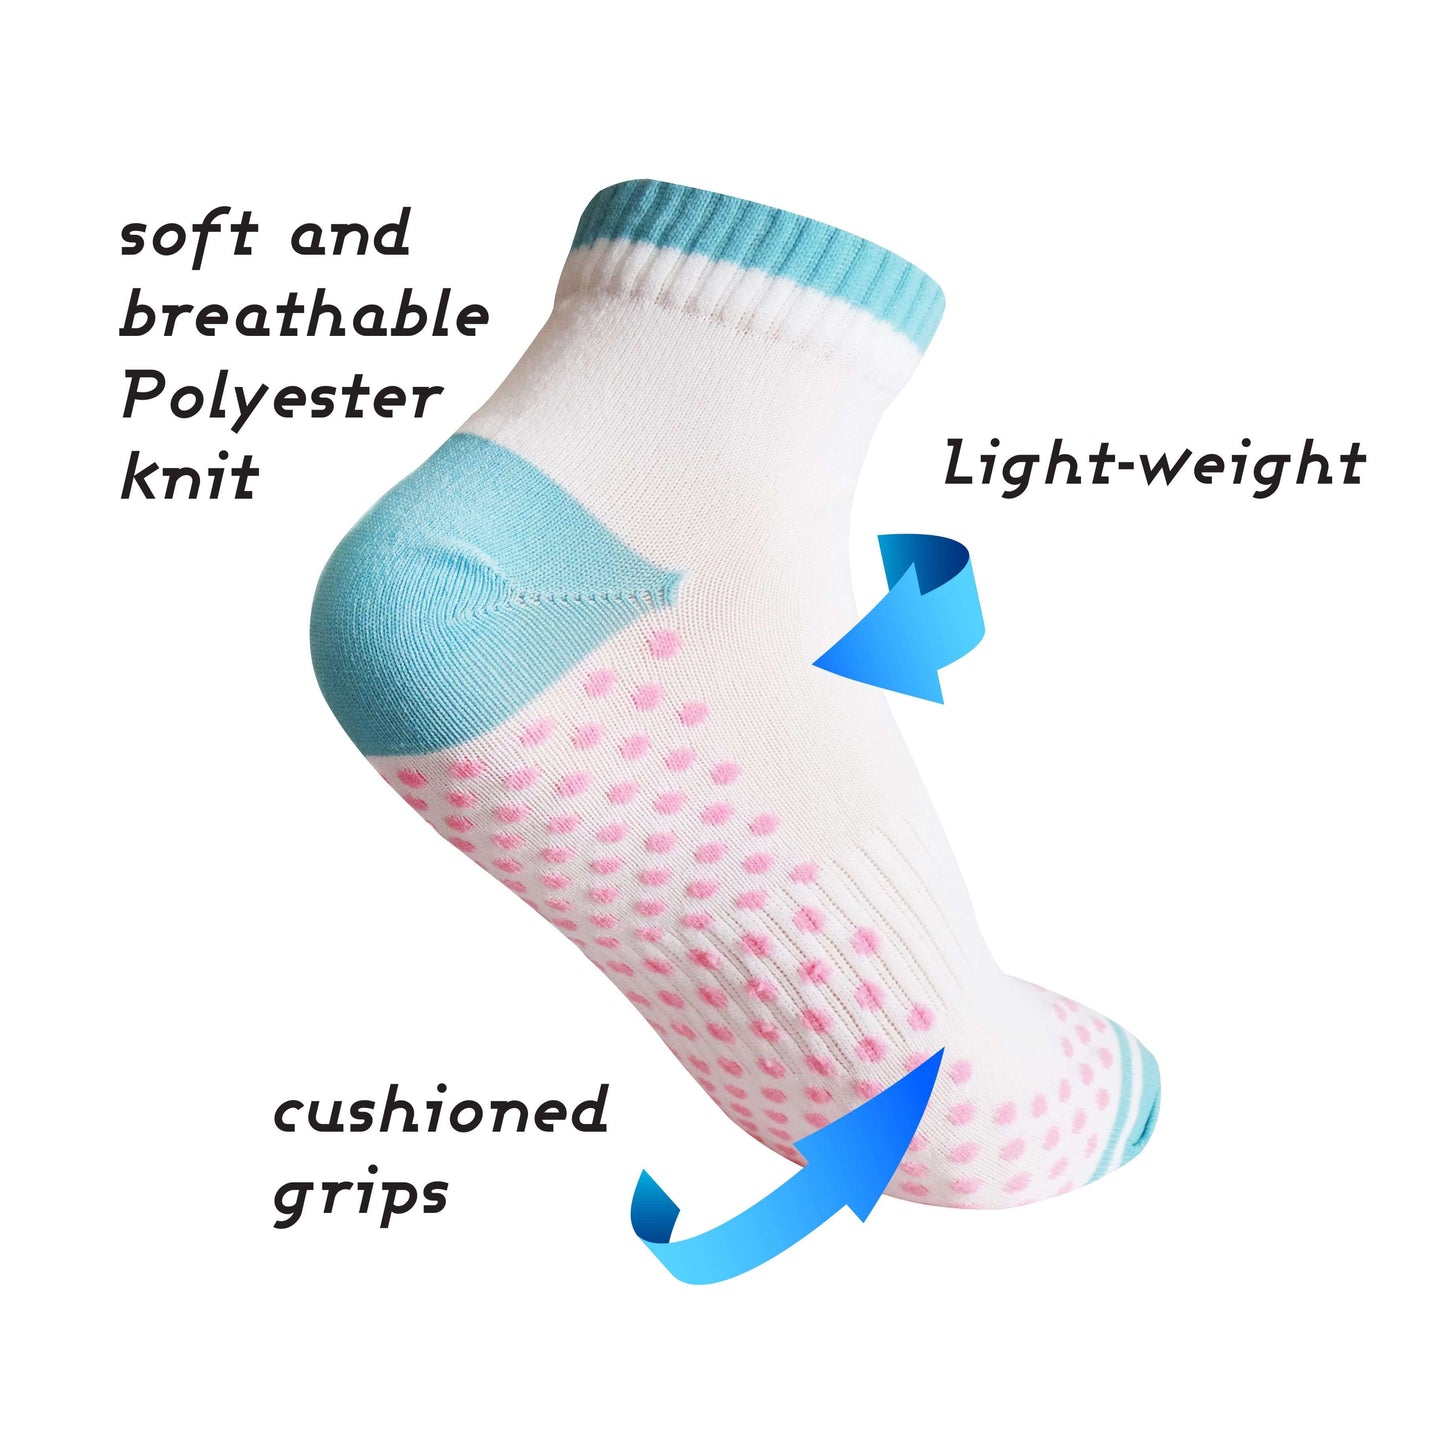 Low cut performance socks for women with built-in grip, offering excellent traction and control during physical activities.